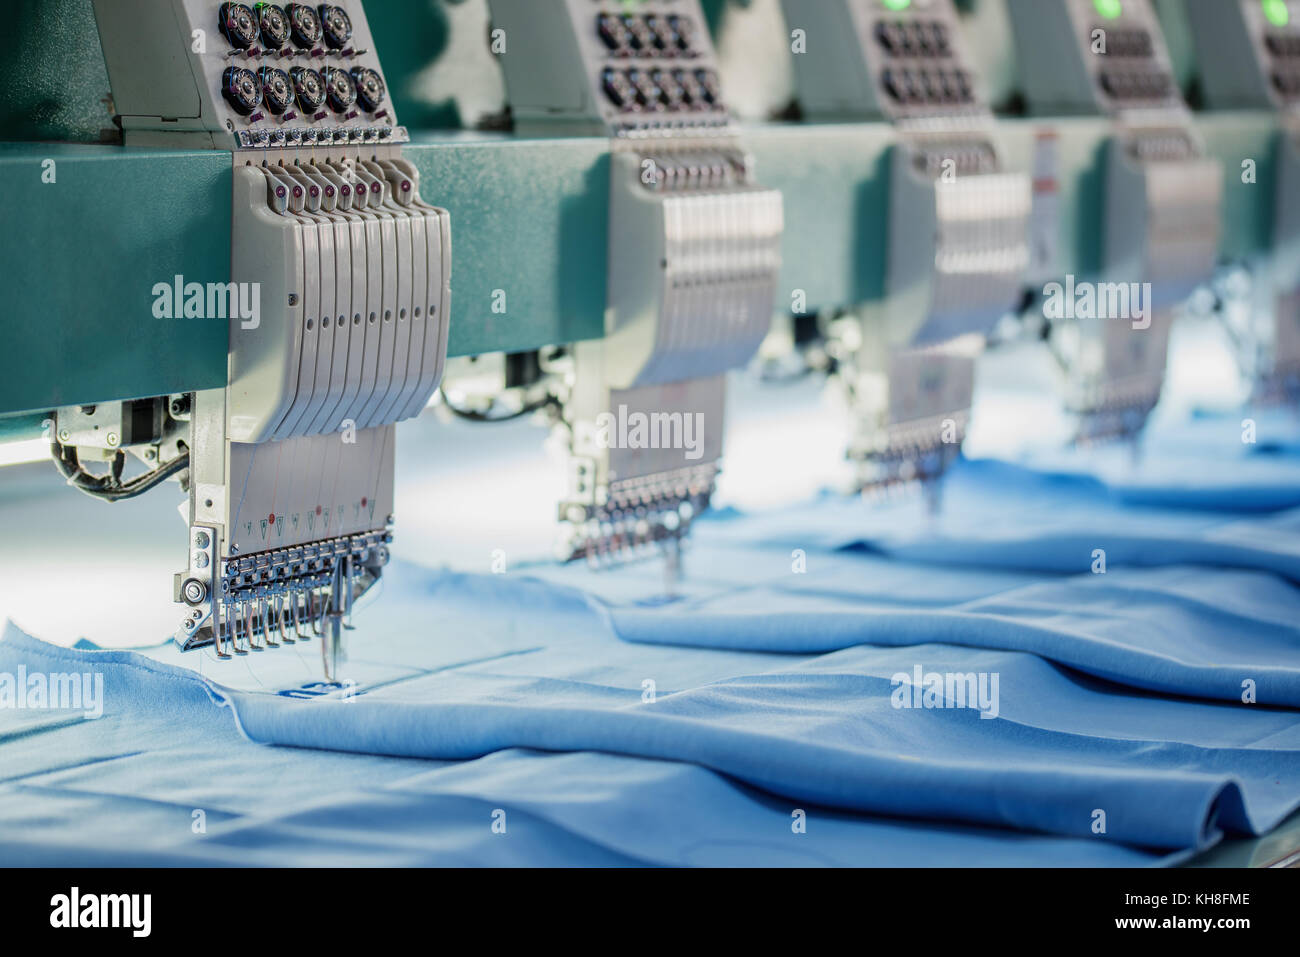 Industrial Embroidery Machine.Textile industry concpet via technology Stock Photo